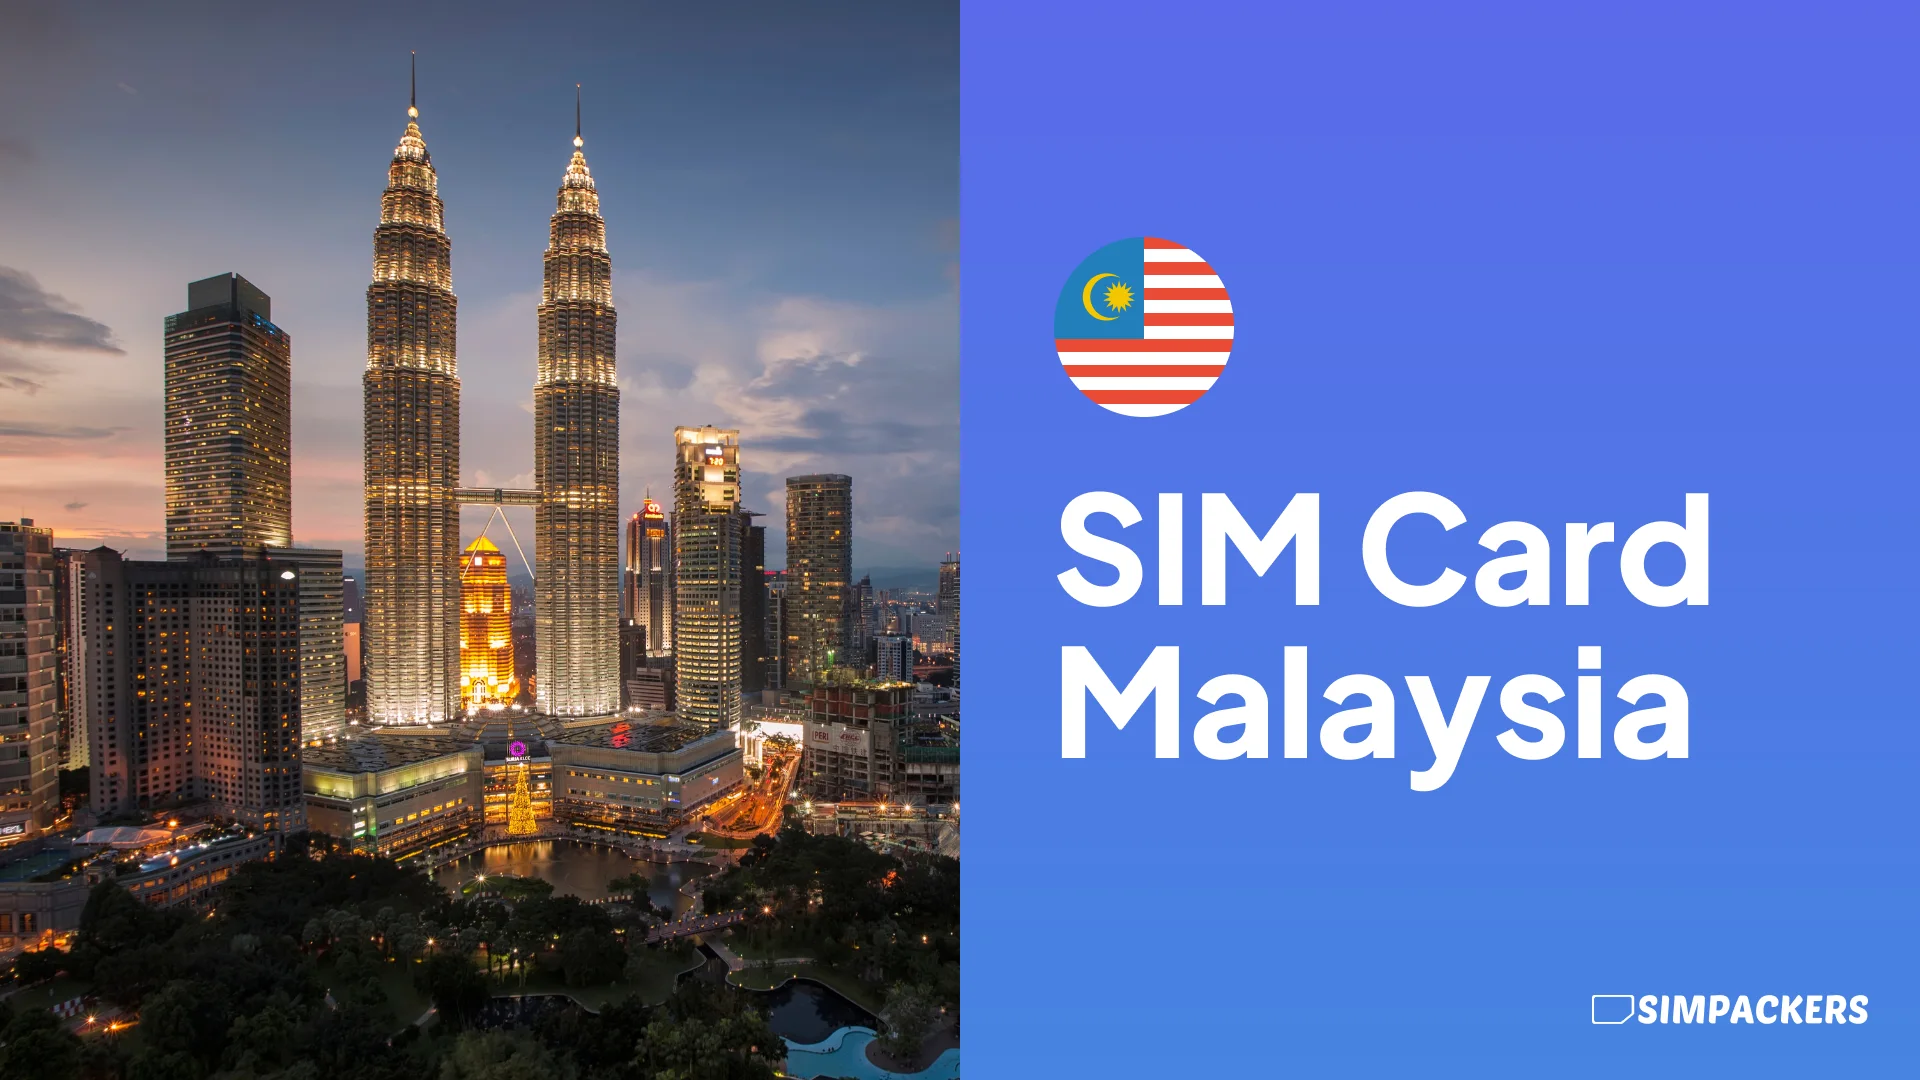 EN/FEATURED_IMAGES/sim-card-malaysia.webp